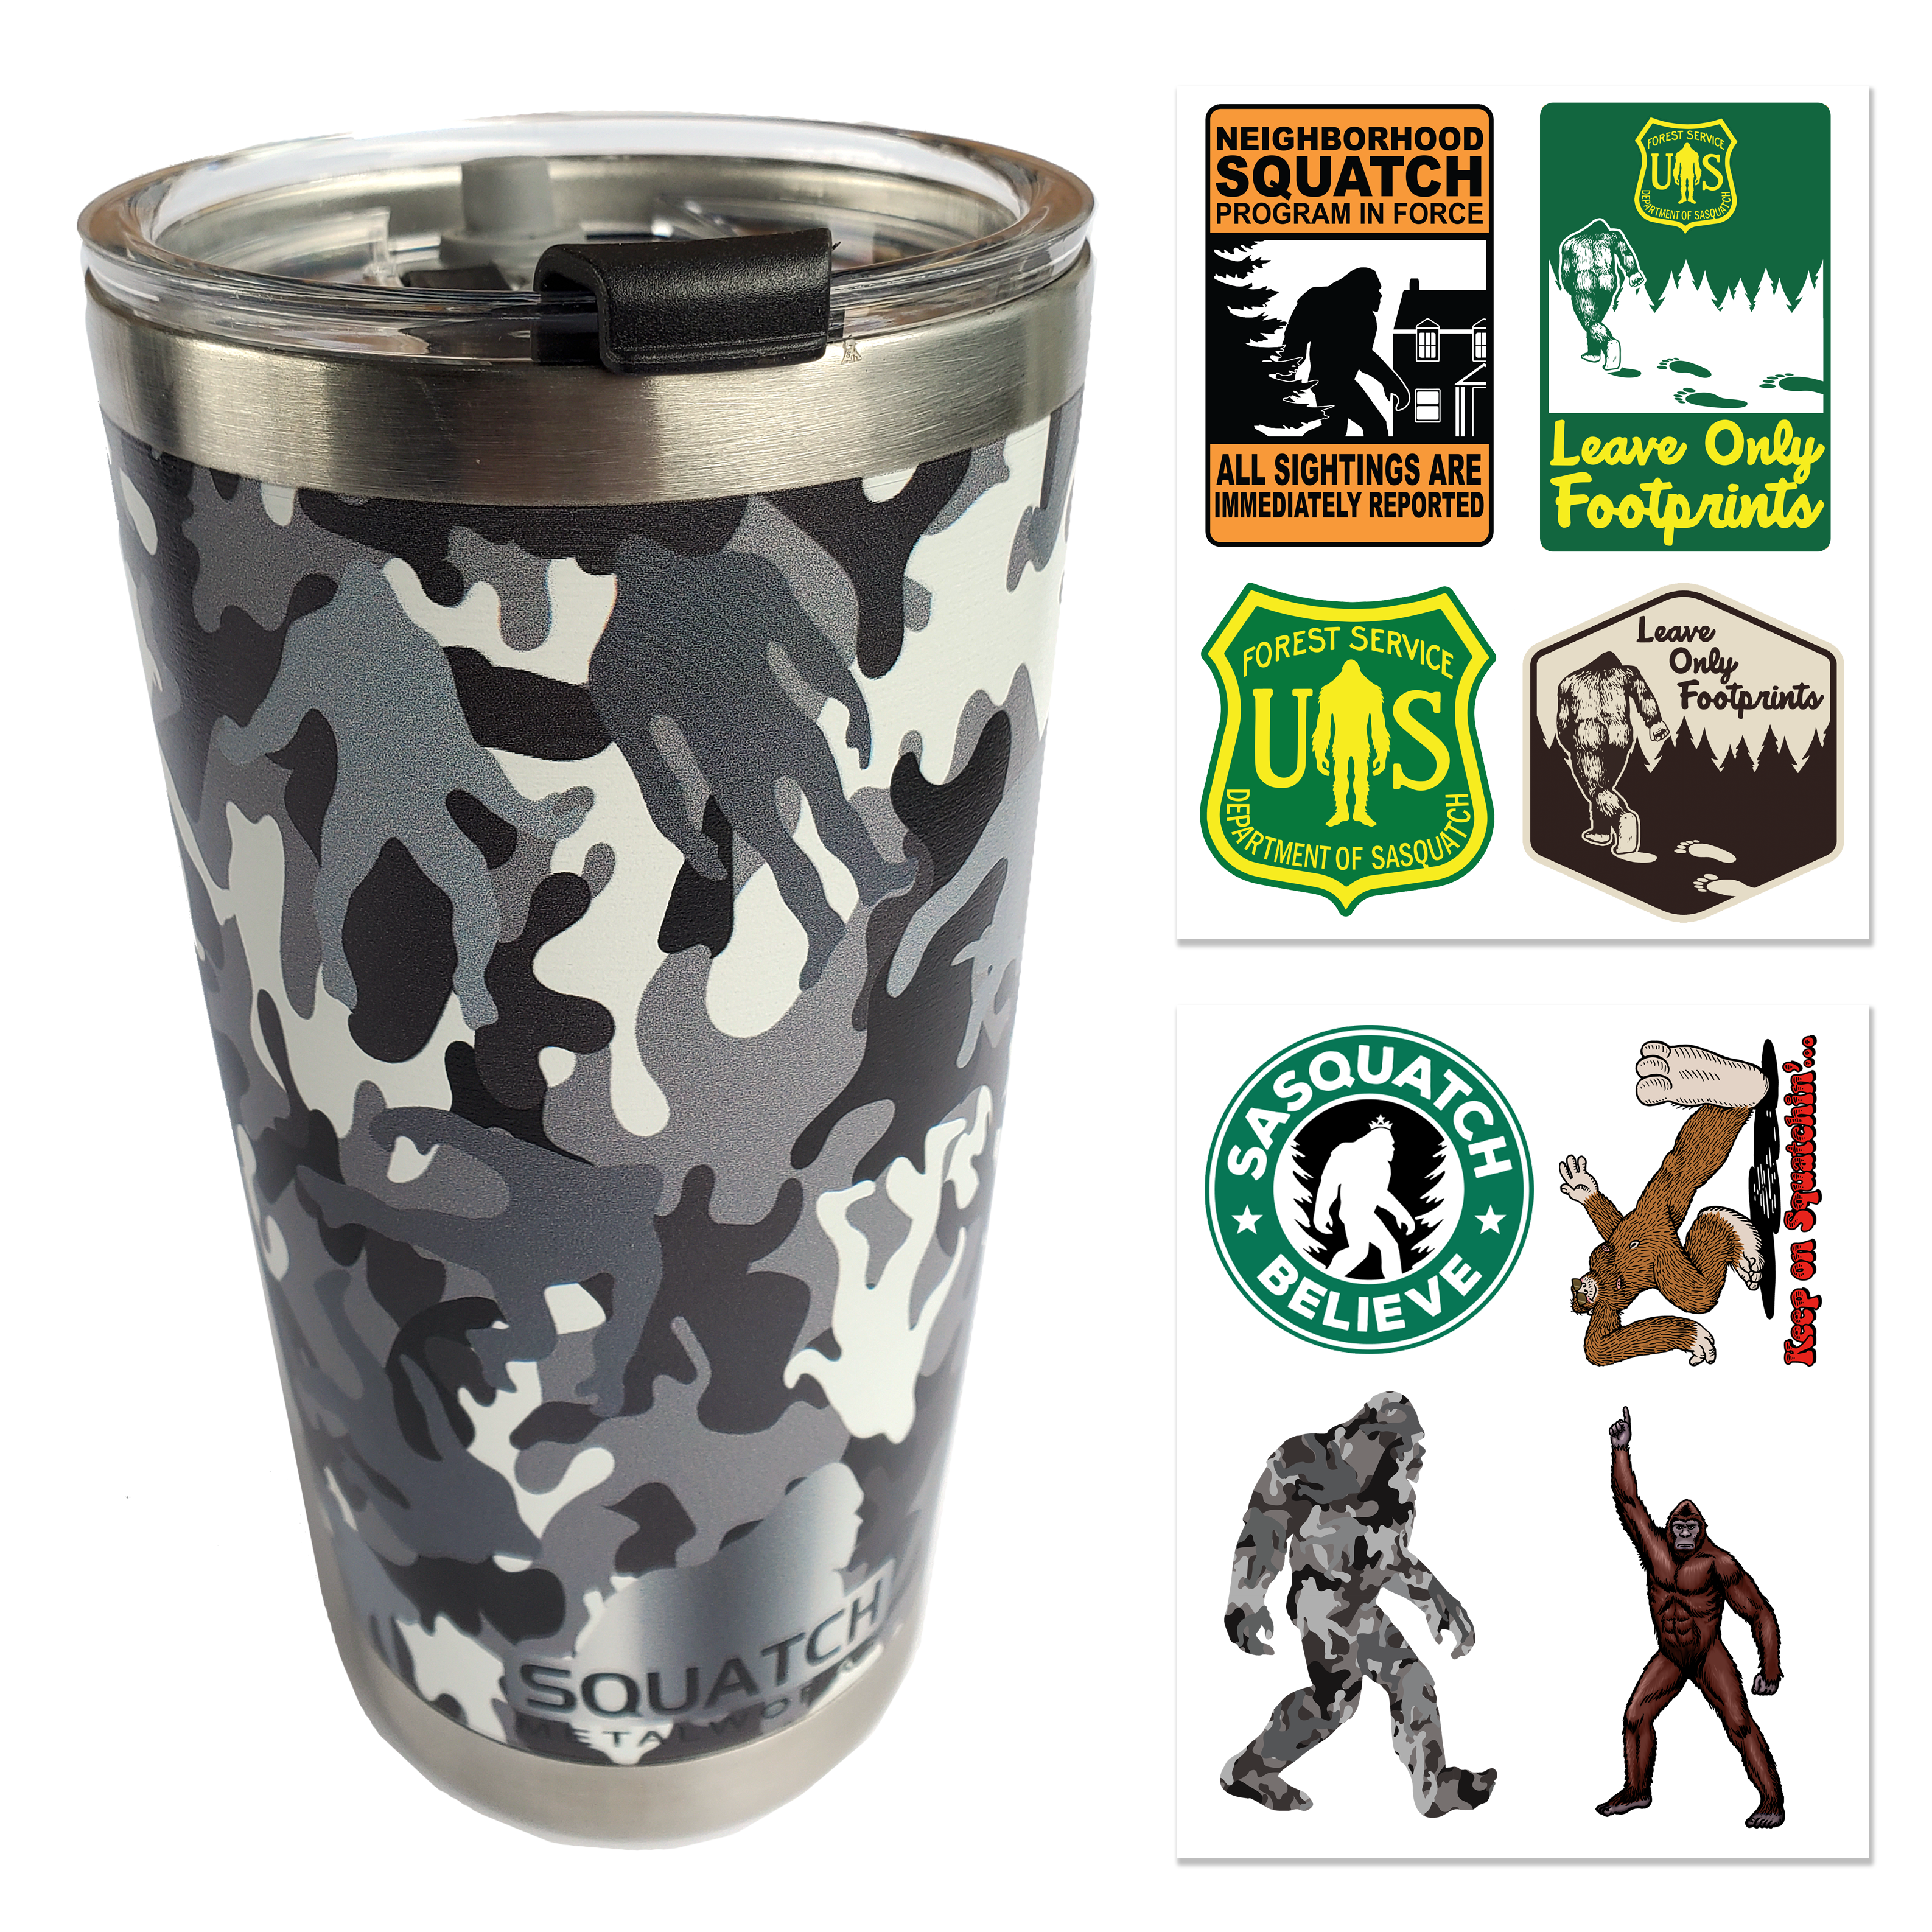 Squatch Metalworks Winter Camo Bigfoot/Sasquatch Tumbler - Stainless Steel 20 oz Reusable Insulated Travel Drinking Mug with Lid - Perfect for Hot